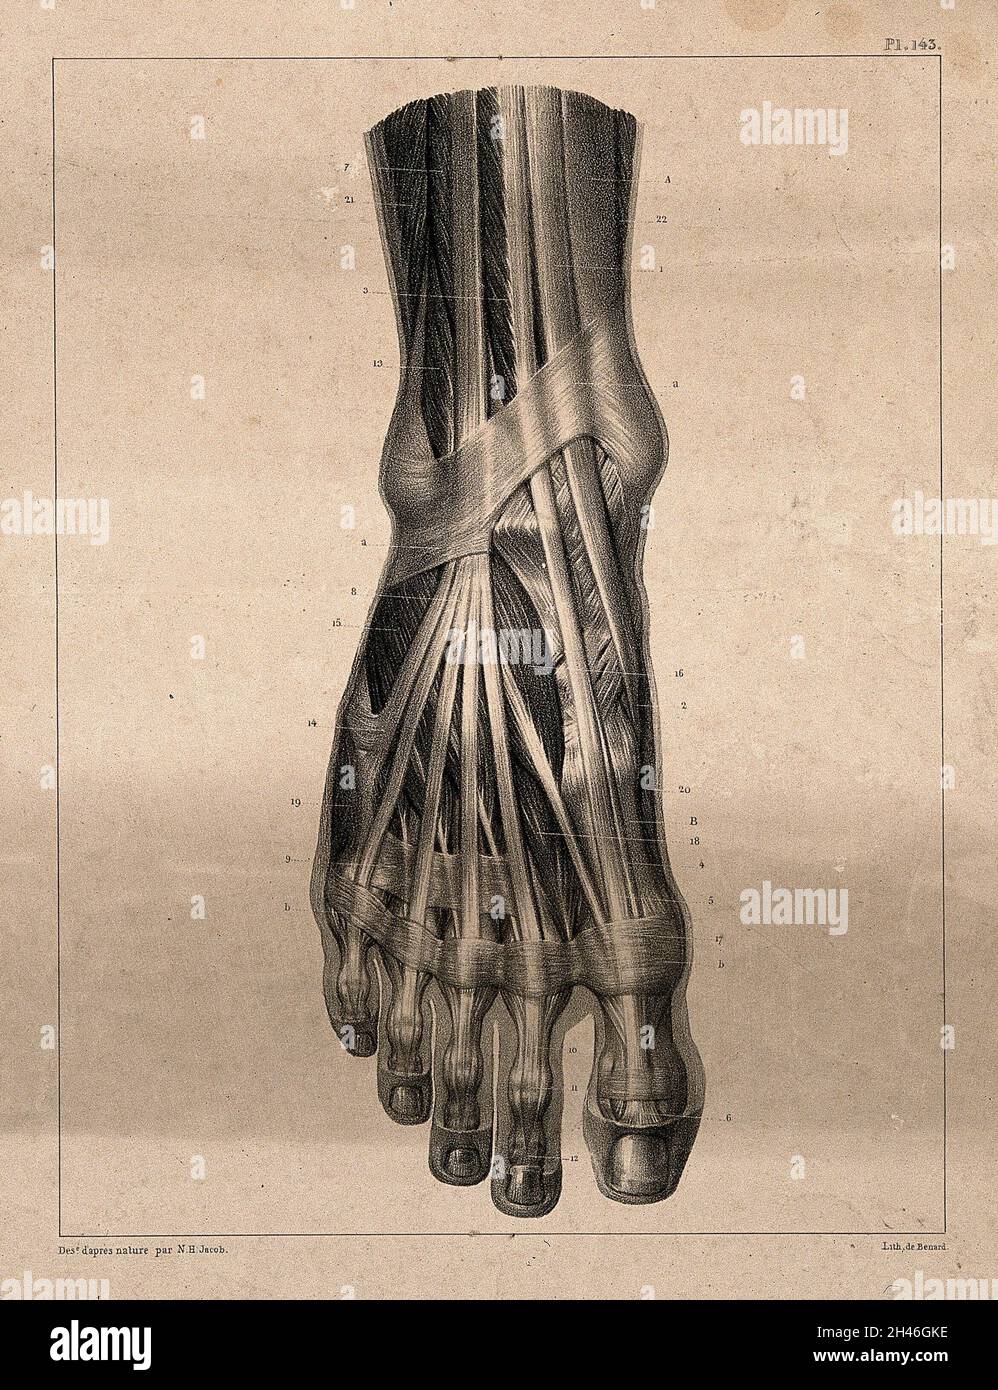 Muscles and tendons of the foot. Lithograph by N.H Jacob, 1831/1854. Stock Photo